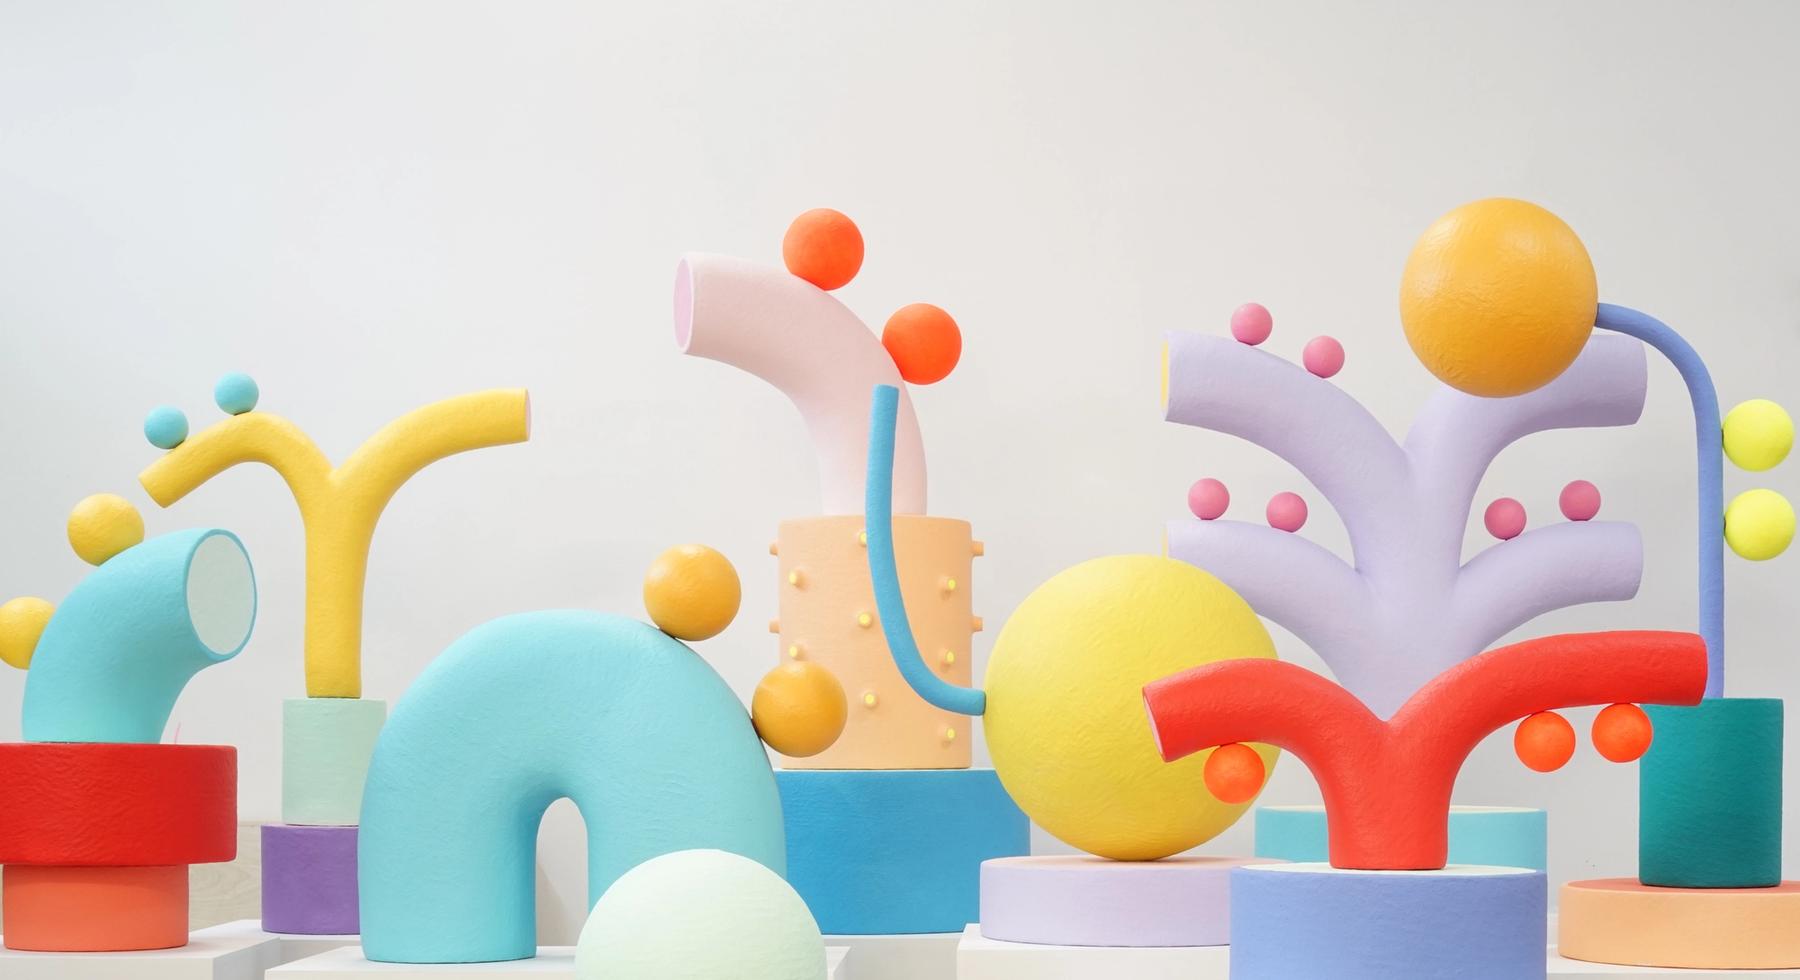 Brightly colored rounded abstract sculptures.